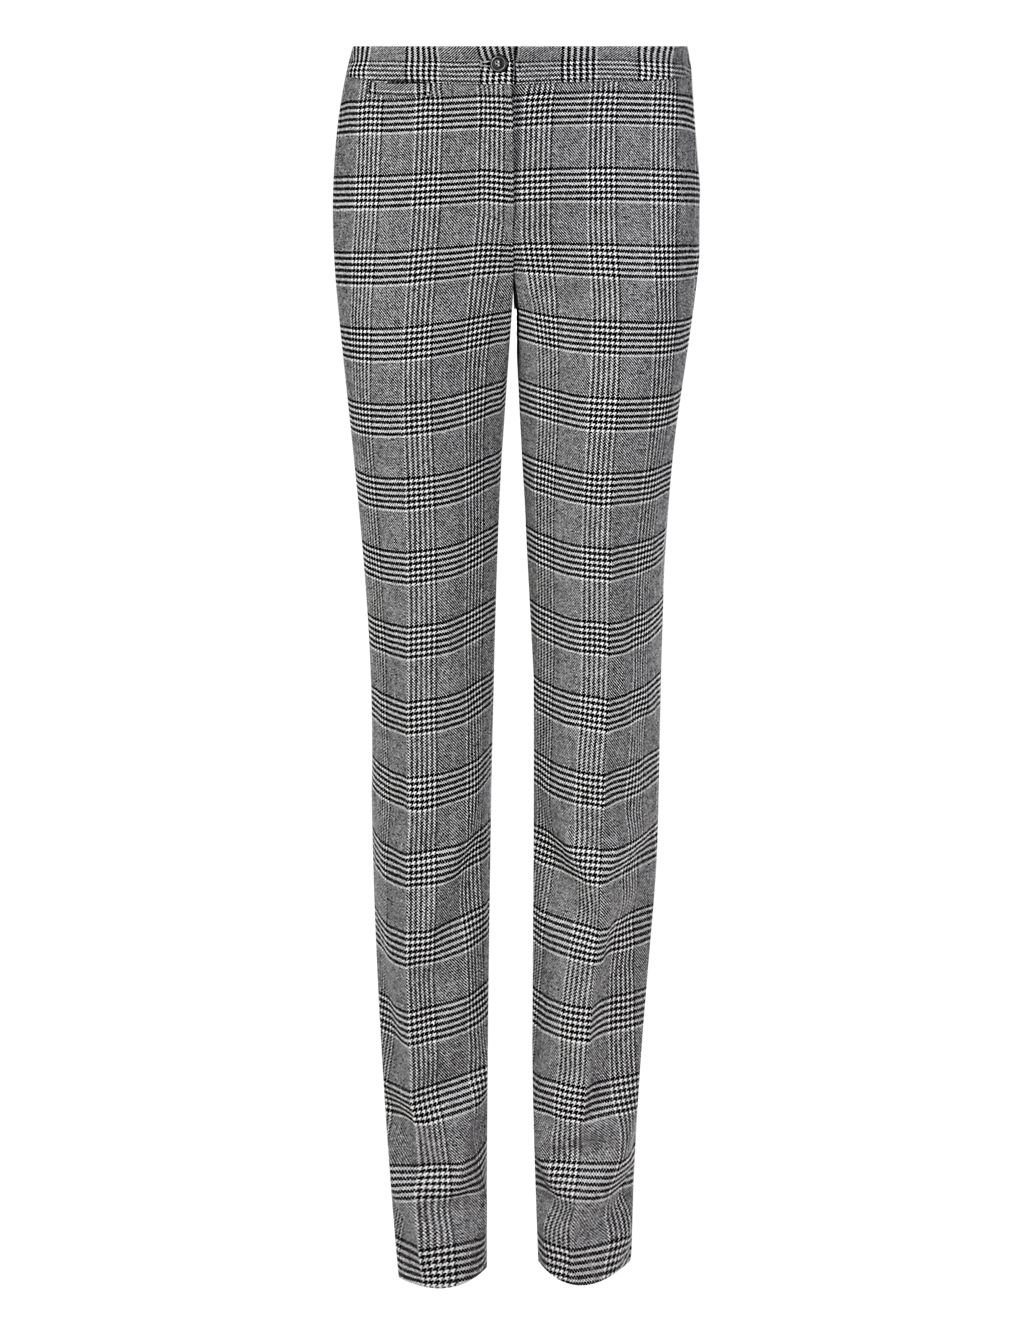 Luxury New Wool Blend Checked Modern Slim Leg Trousers with Cashmere 1 of 4